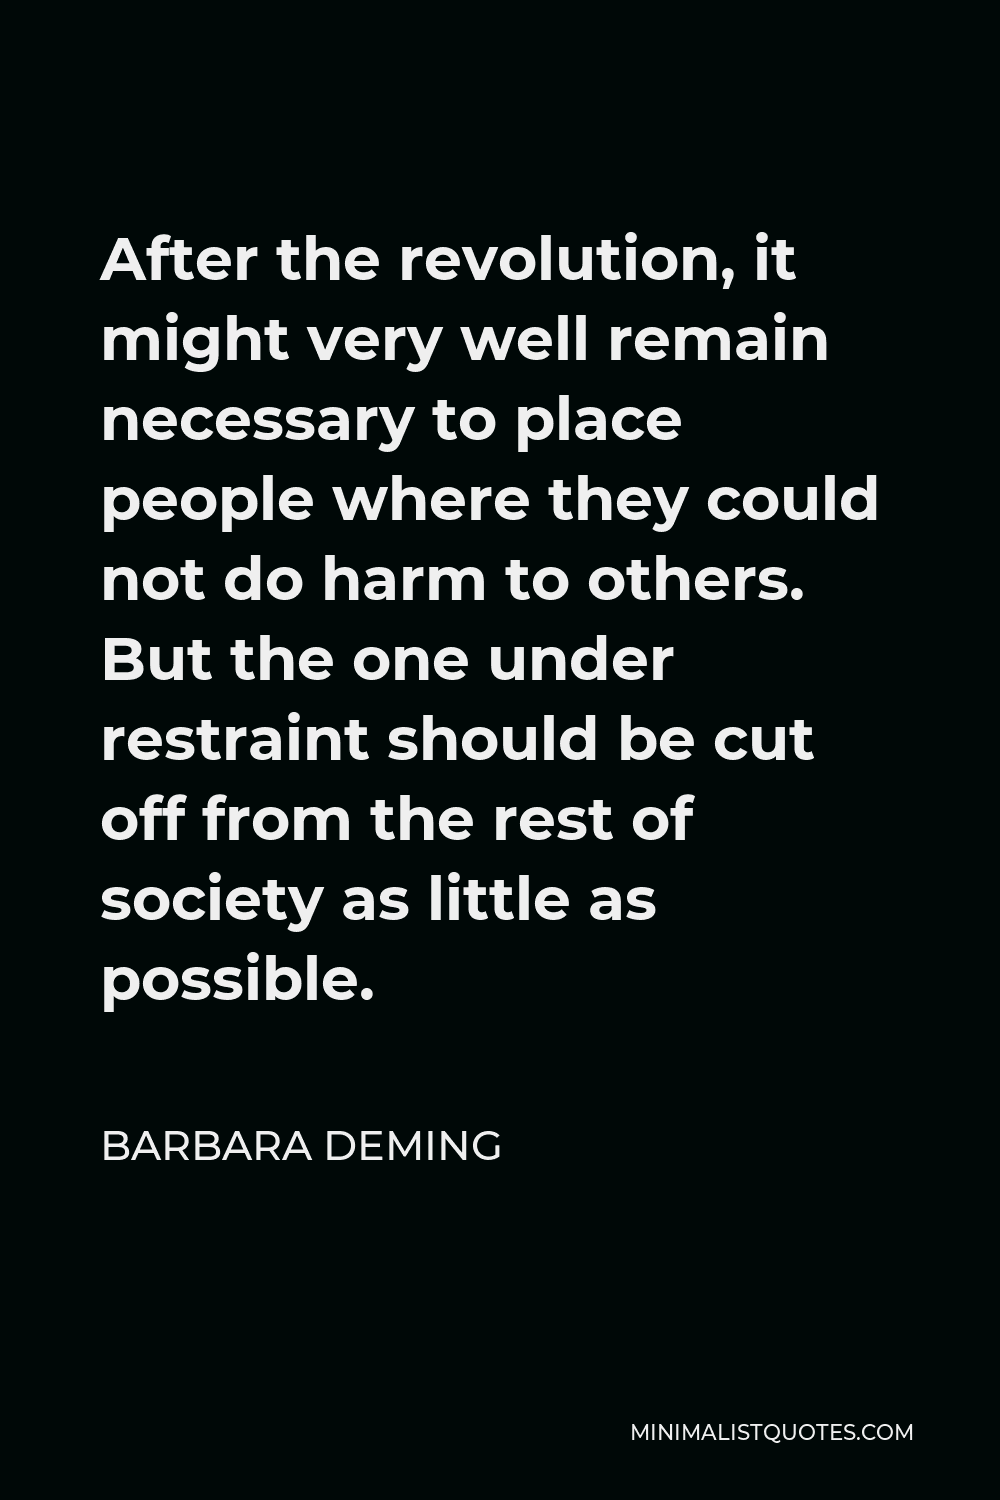 Barbara Deming Quote - After the revolution, it might very well remain necessary to place people where they could not do harm to others. But the one under restraint should be cut off from the rest of society as little as possible.